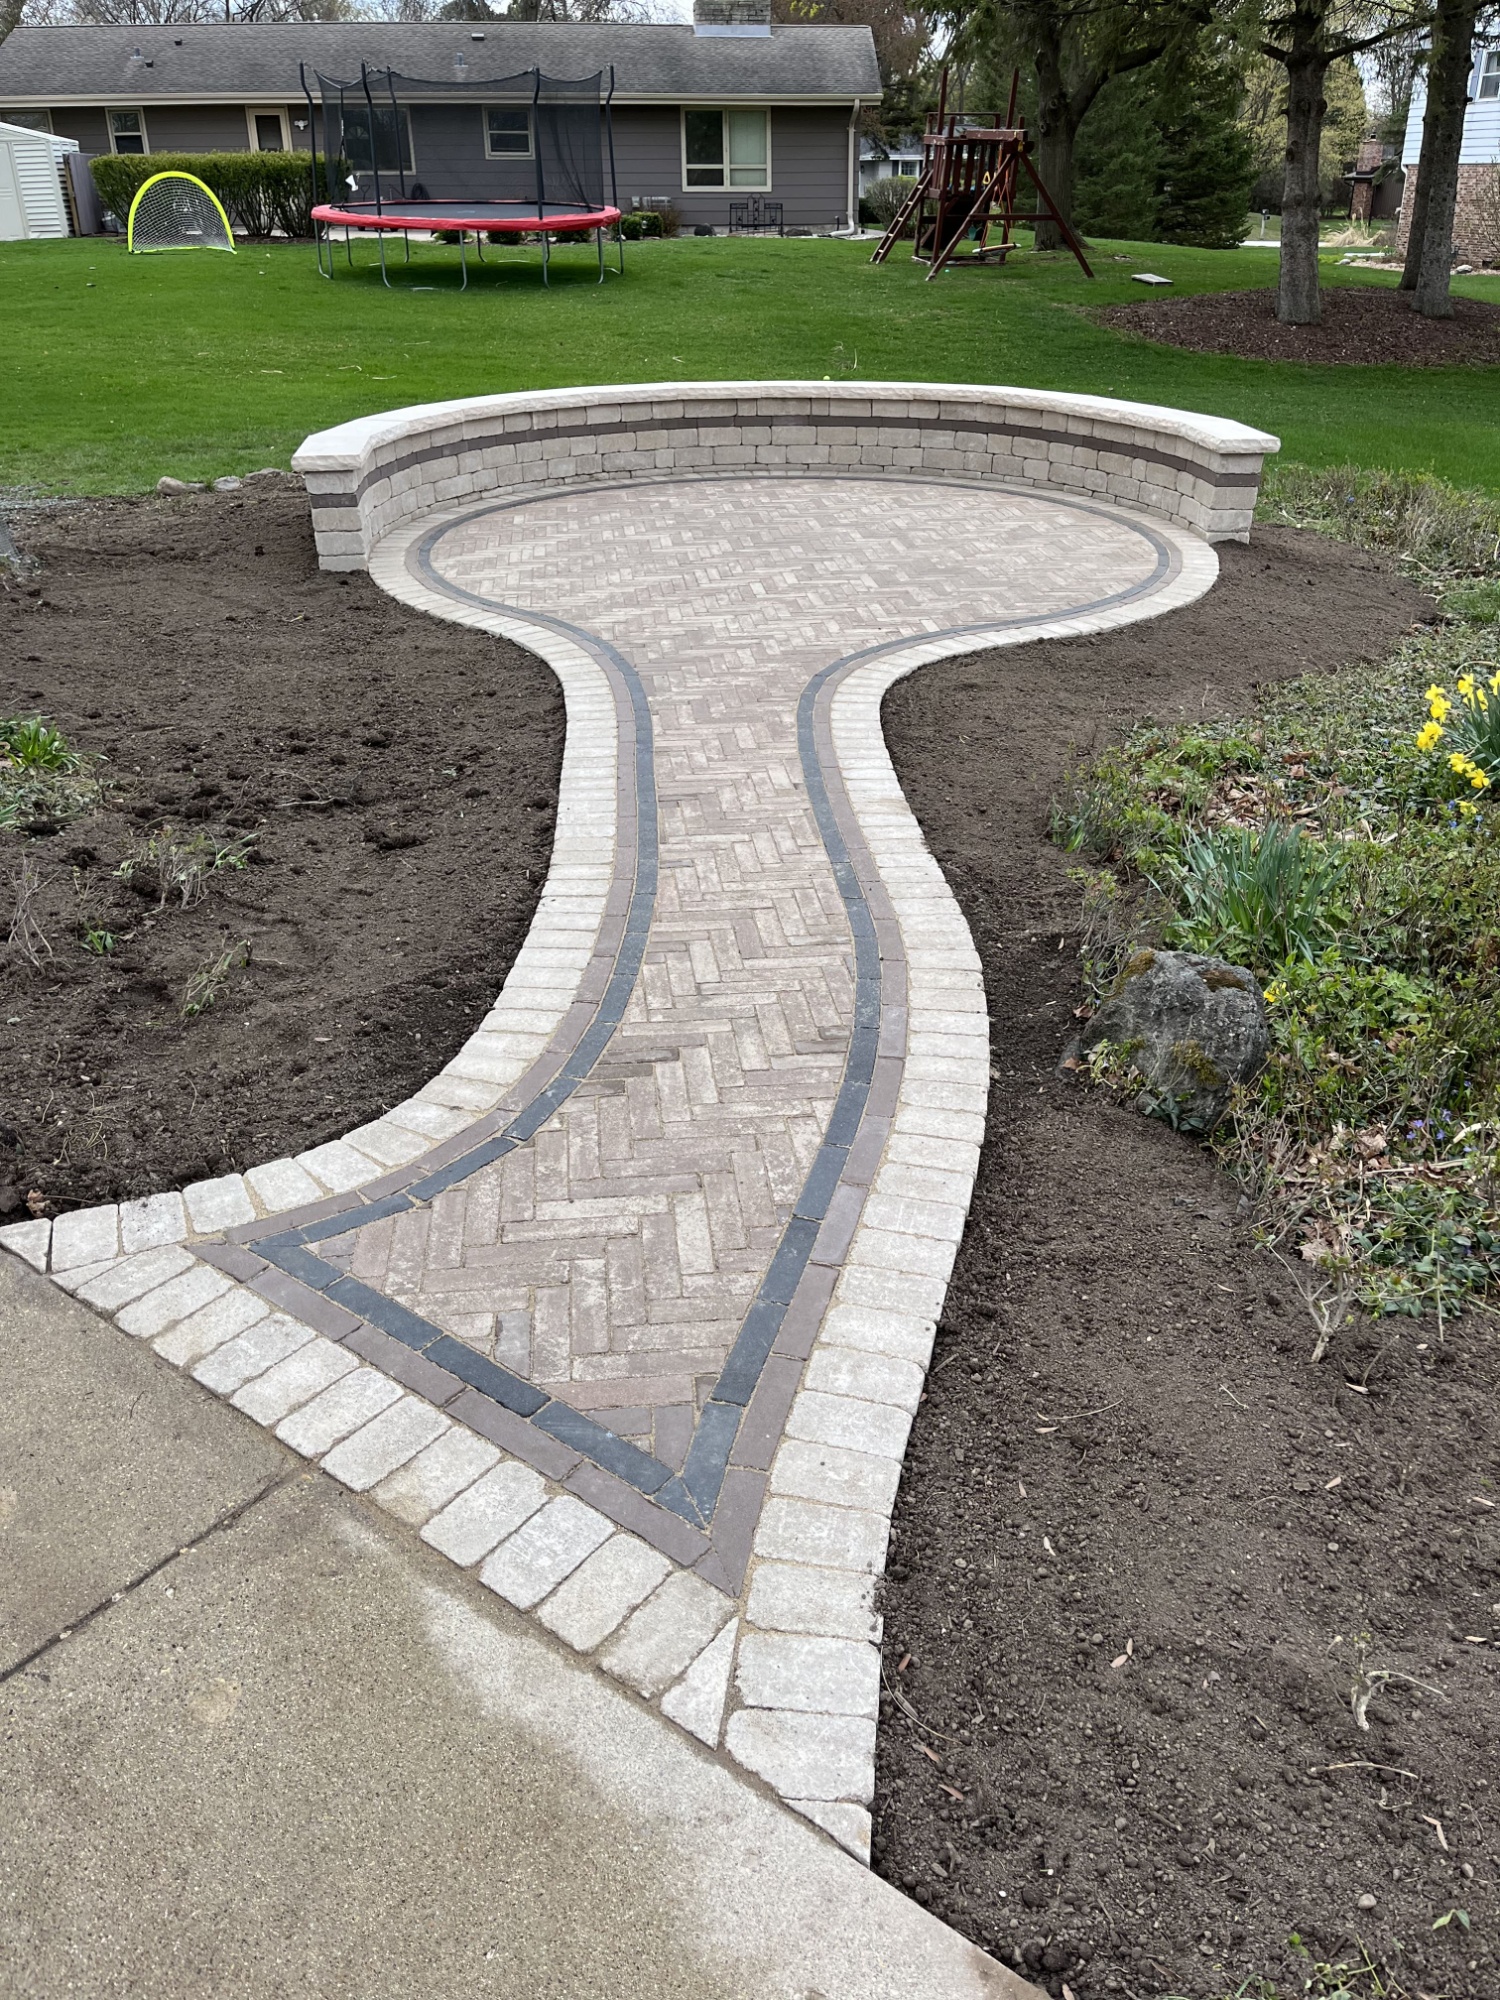 Brick patio extension with pathway & sitting wall